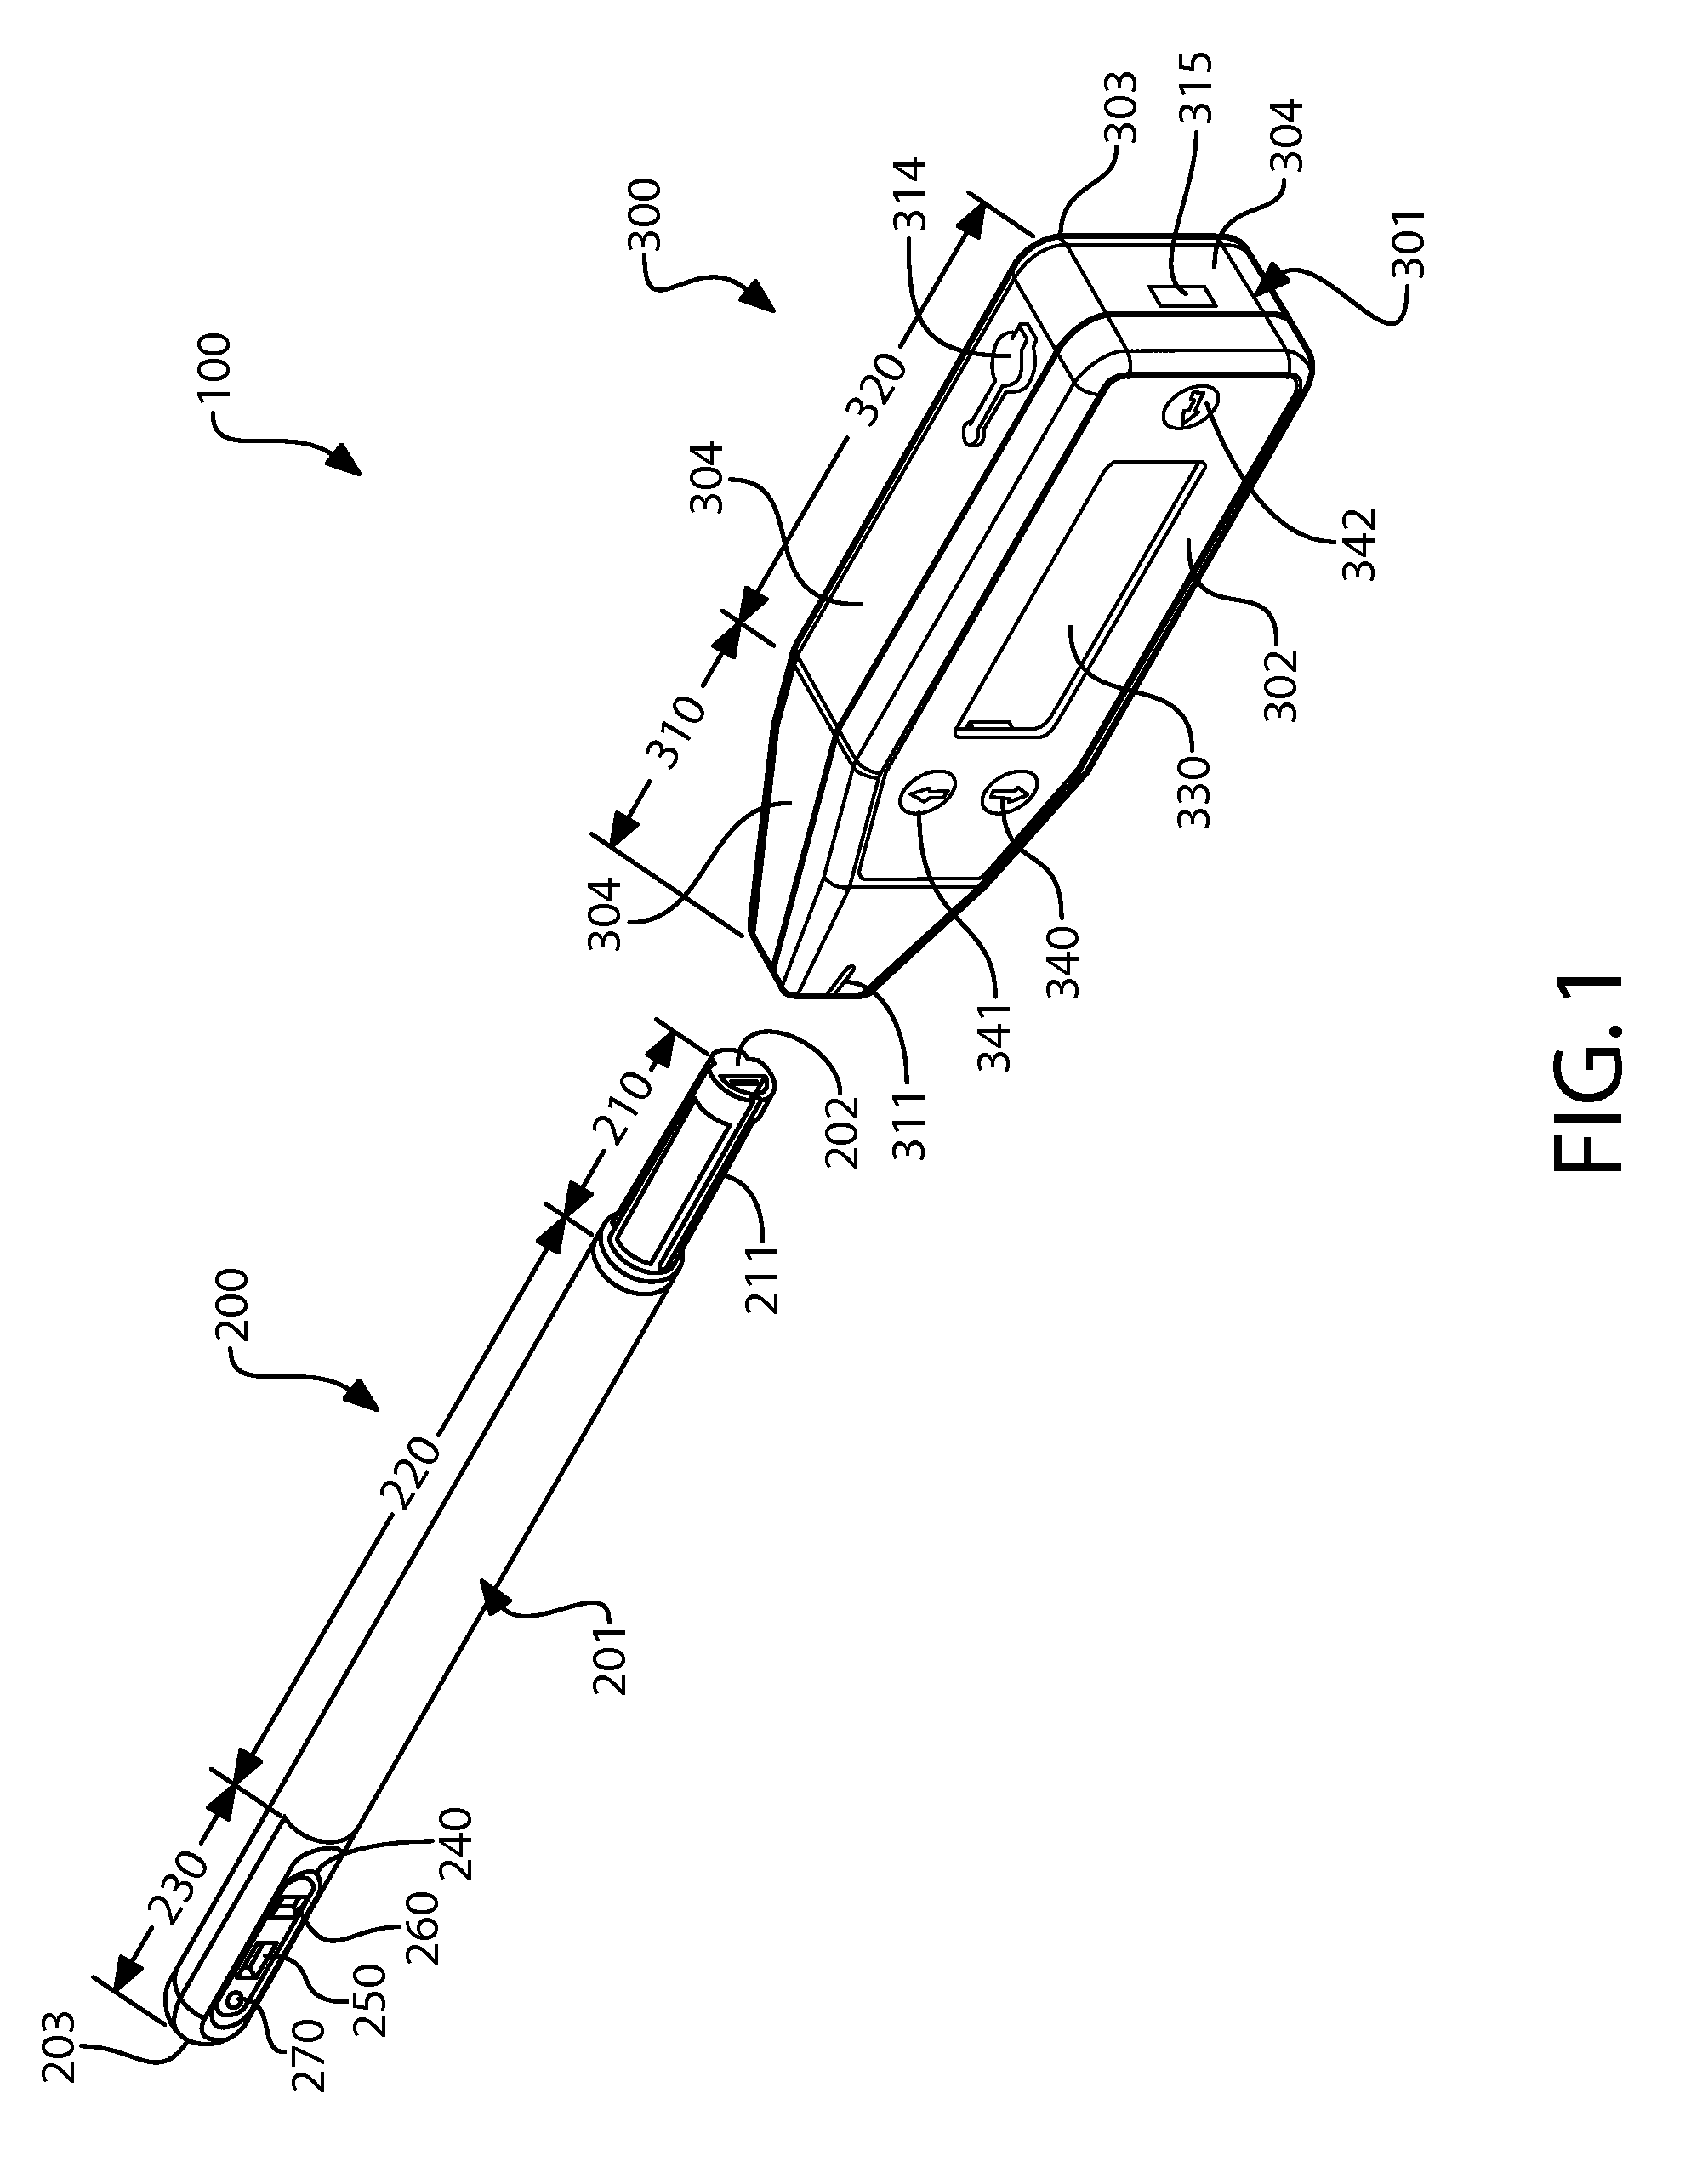 Apparatus, method and system for determining a physiological condition within a mammal